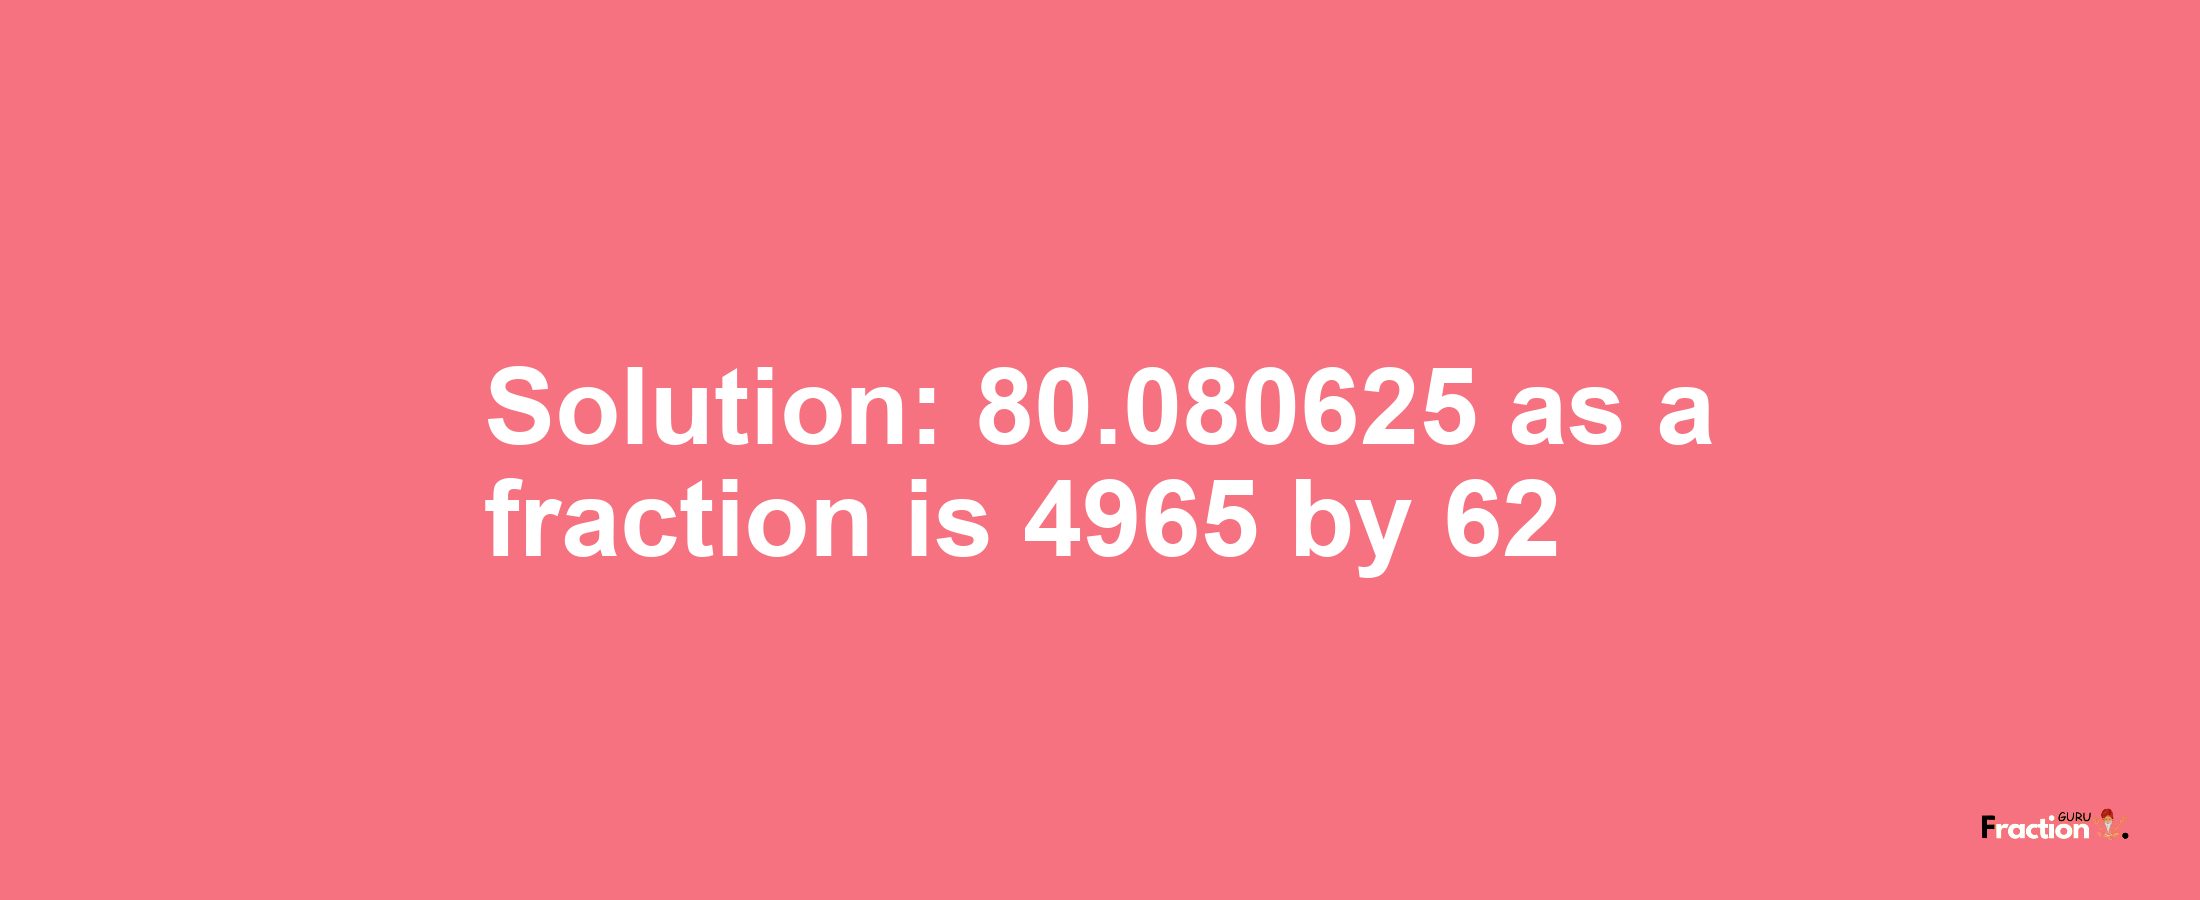 Solution:80.080625 as a fraction is 4965/62